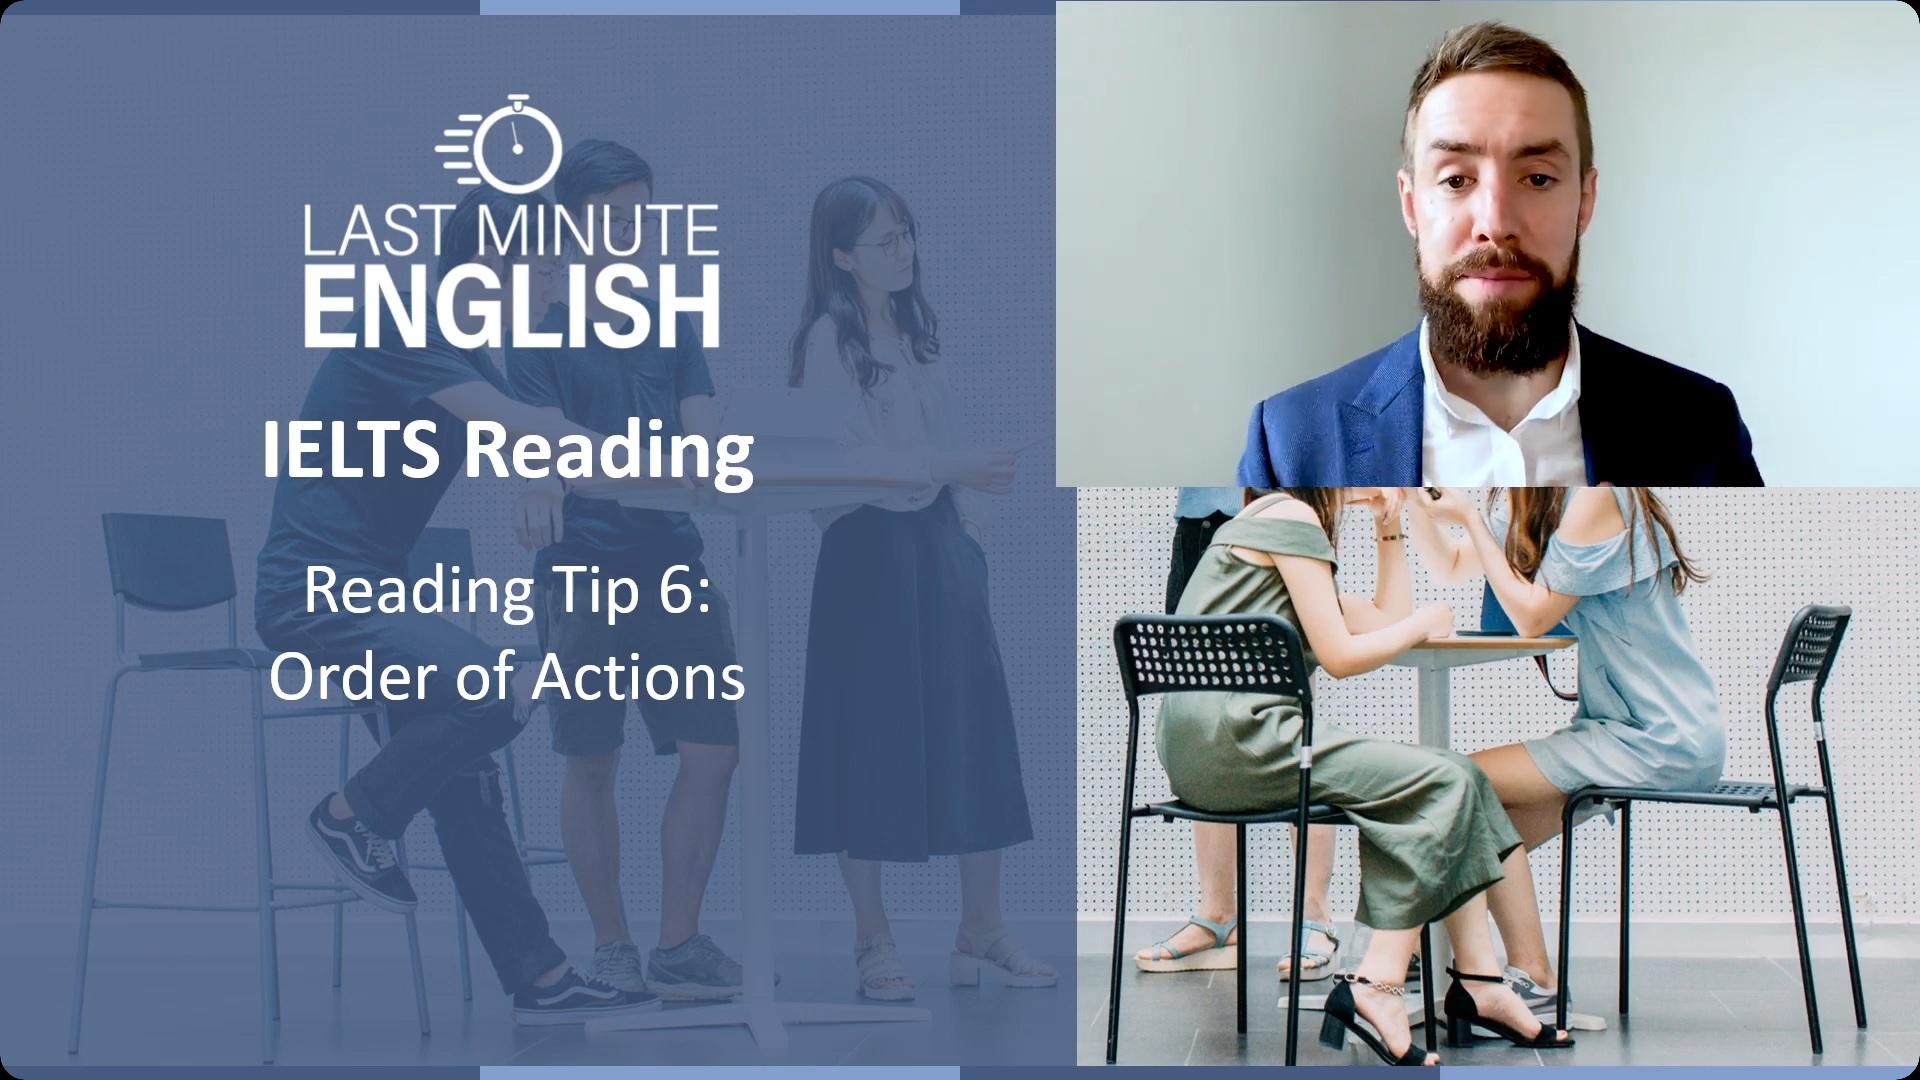 IELTS Reading - Tip 6 - Order of Actions